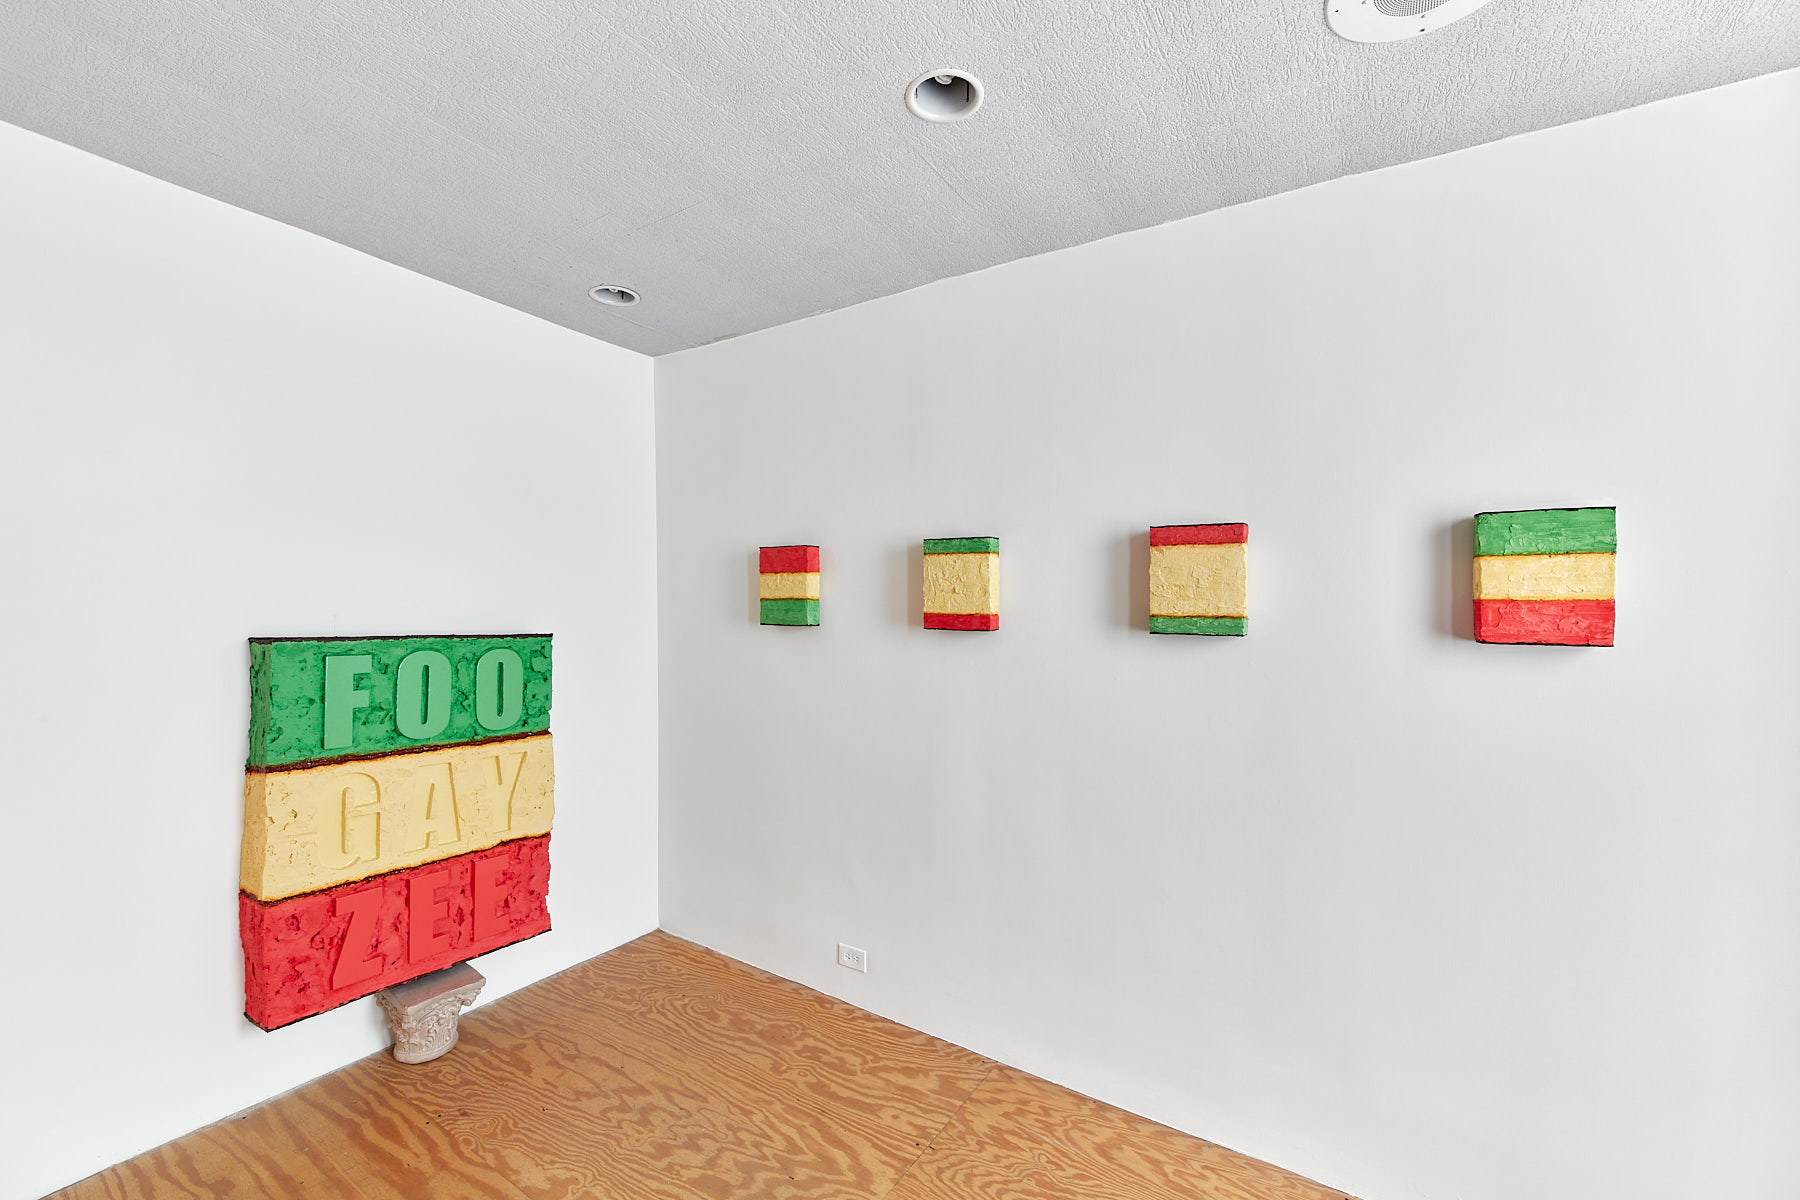 FooGayZee: New Paintings by John Avelluto at Stand4 Gallery, curated by Jeannine Bardo